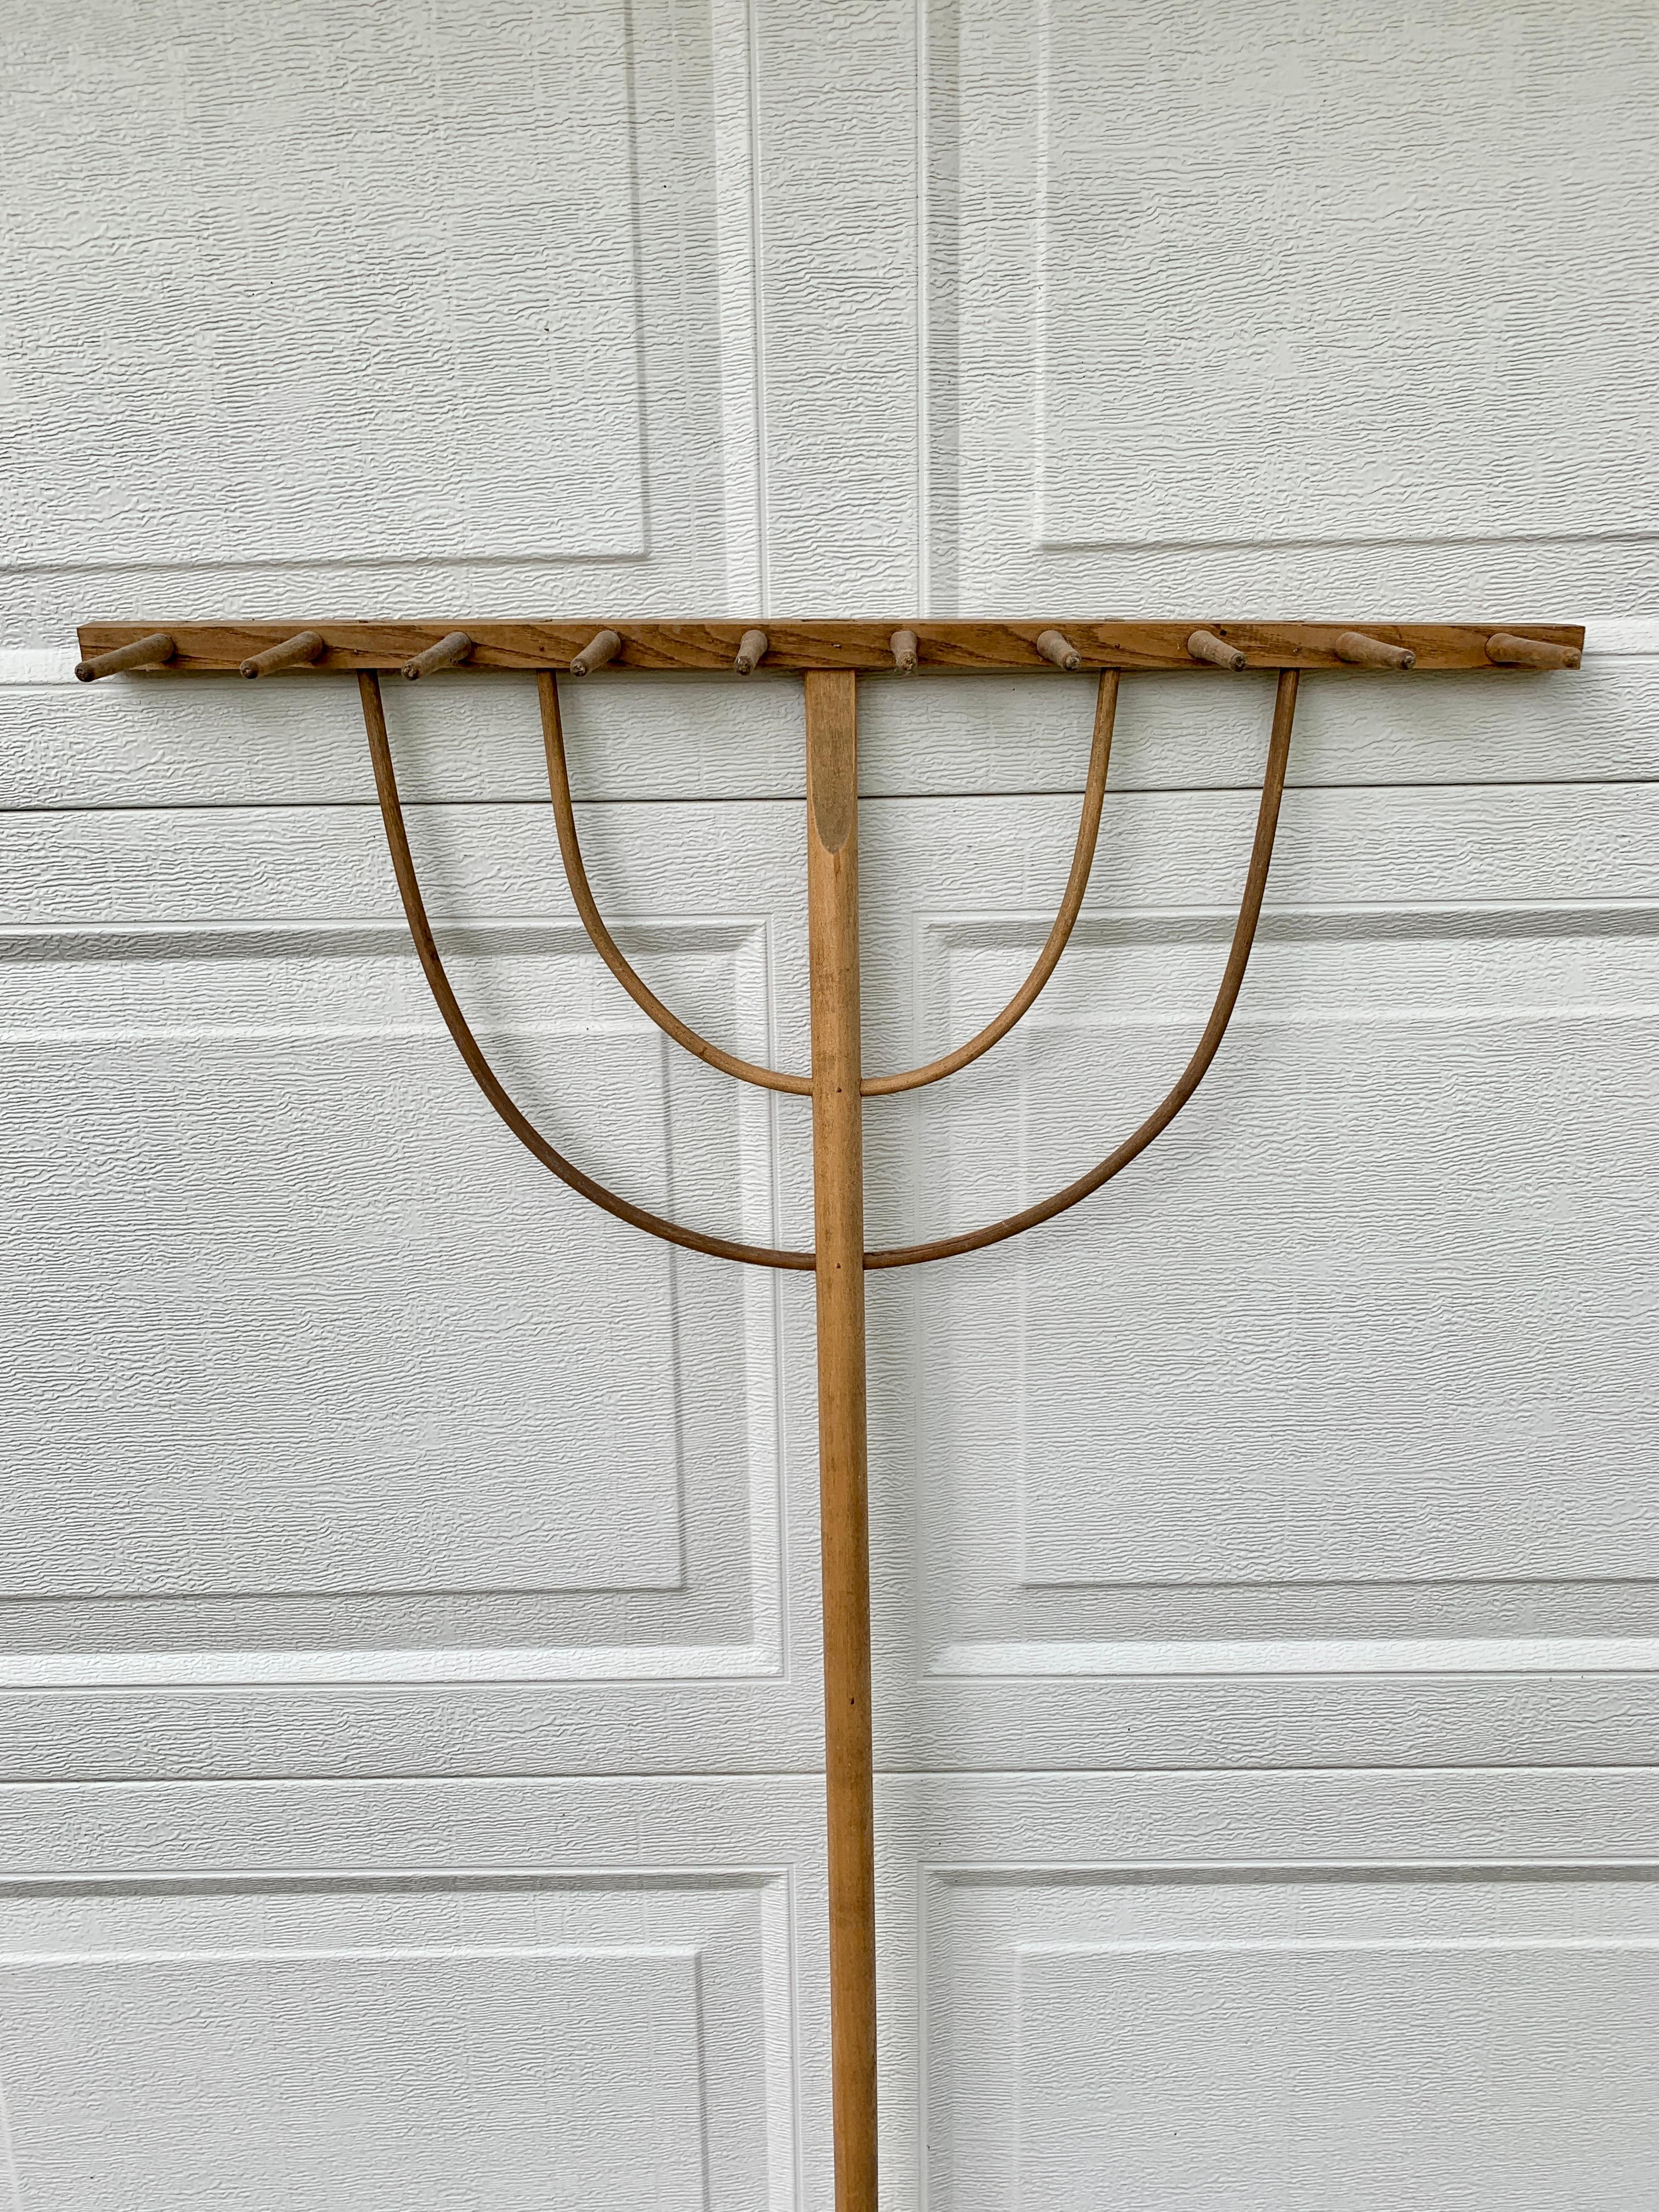 Rustic Antique Early 20th Century Hand Made Wooden Hay Rake For Sale